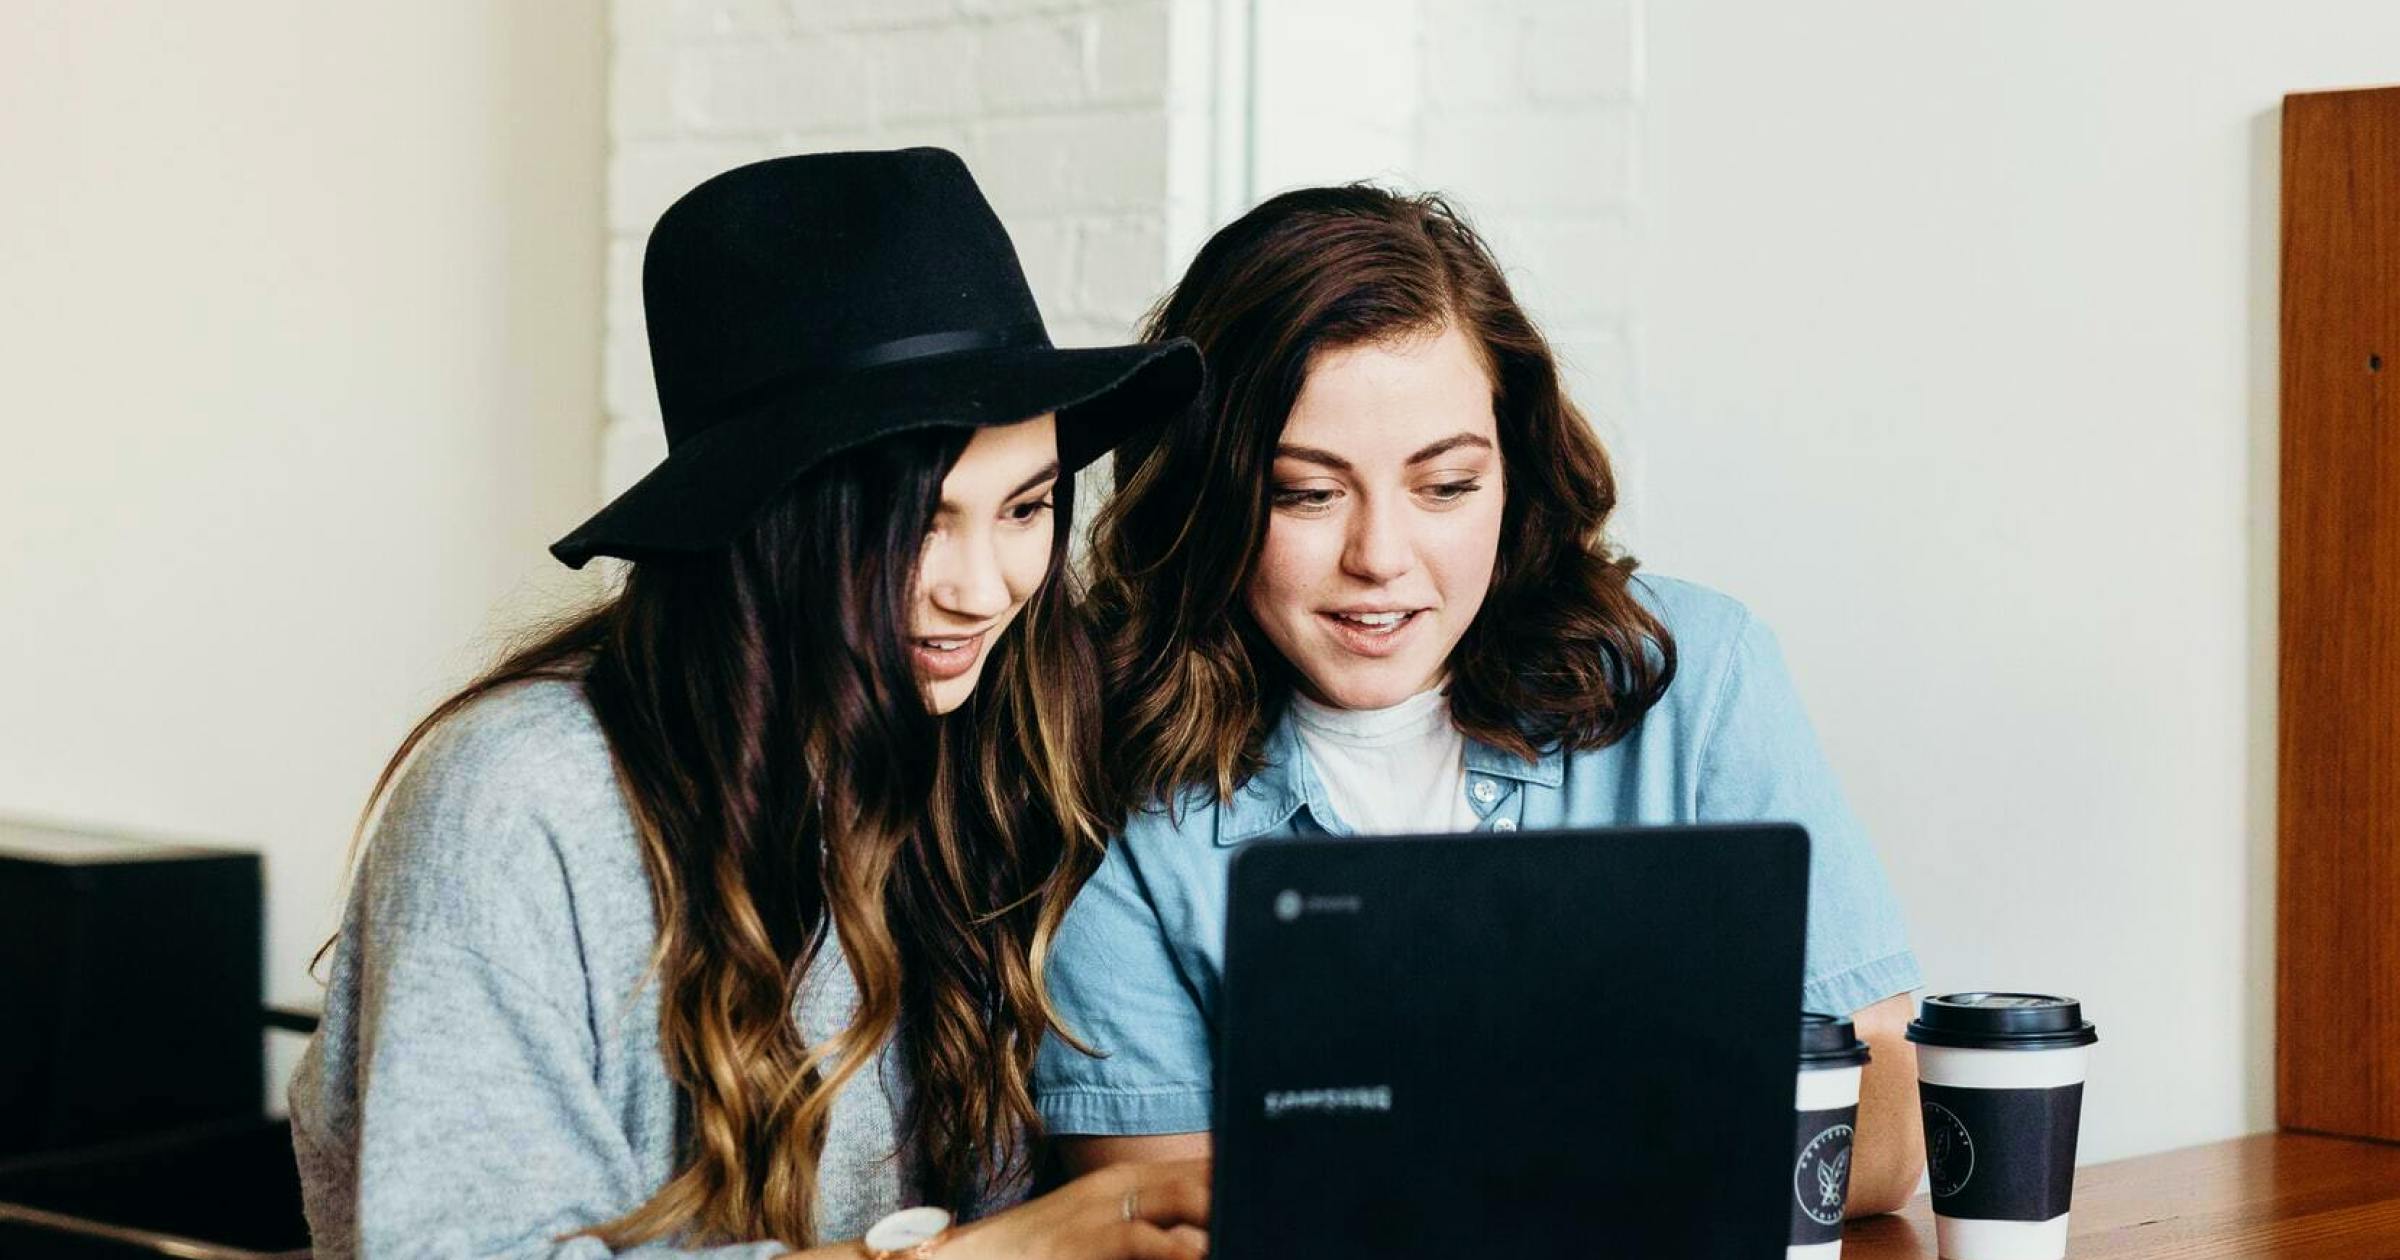 Two young brunette women booking a trip on a computer at a cafe with coffees on the table